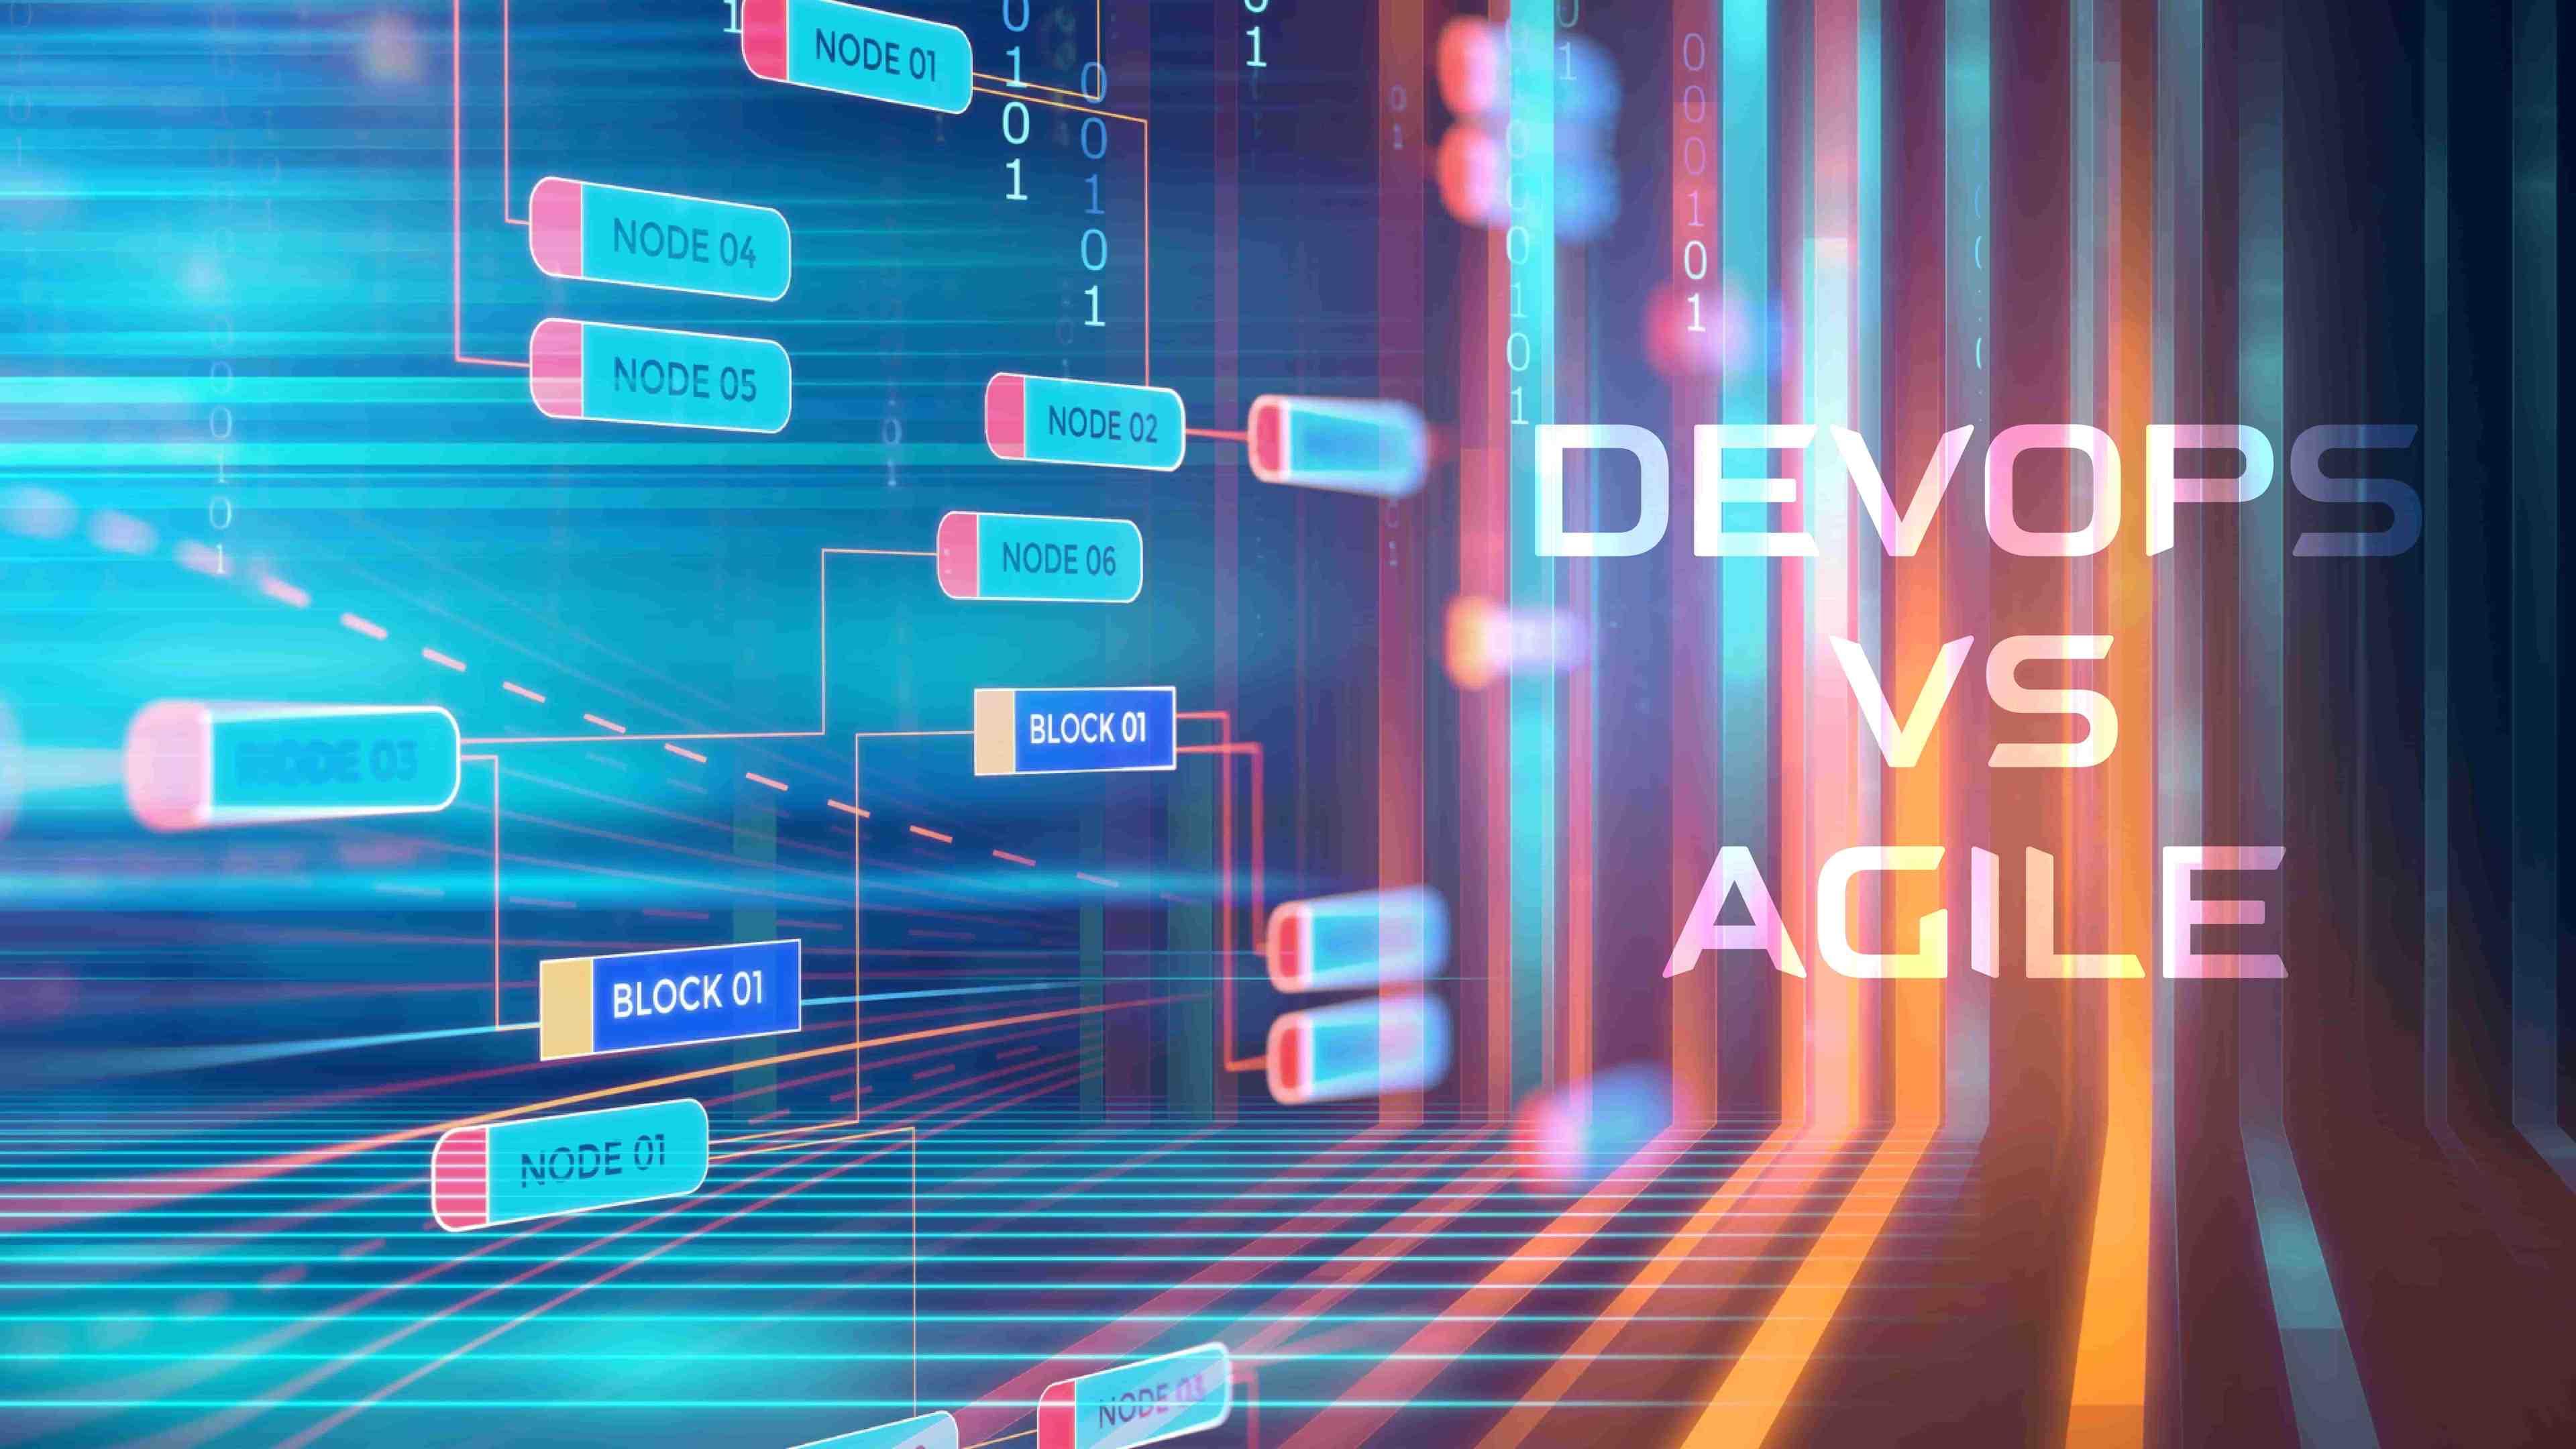 Agile vs. DevOps: What's the Difference? and Similarities?